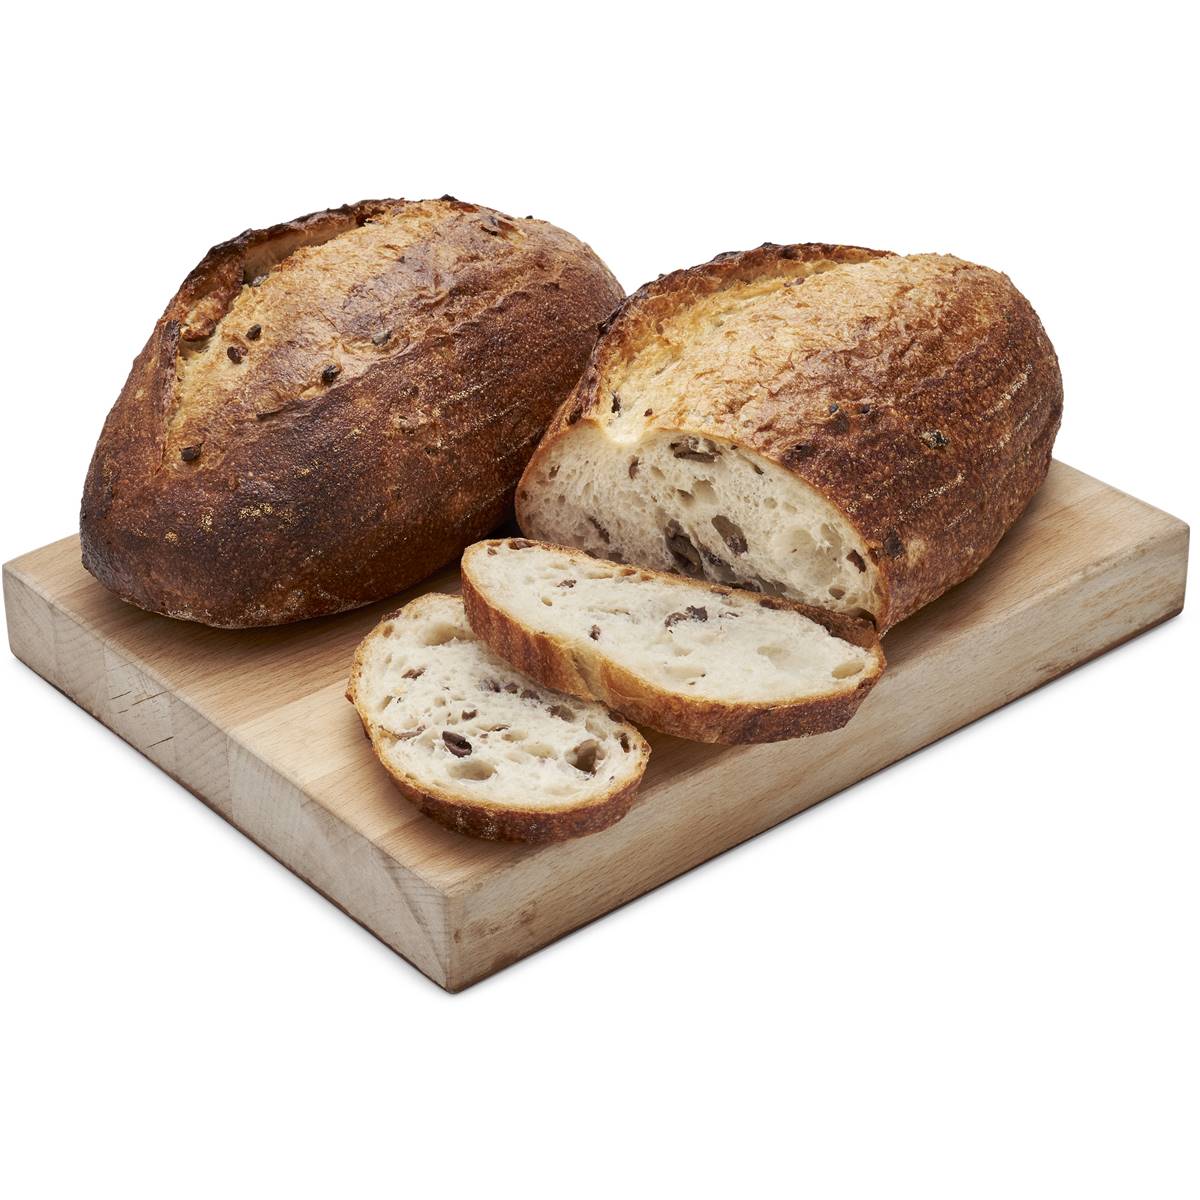 Calories in Woolworths Bread Sourdough Kalamata Olive